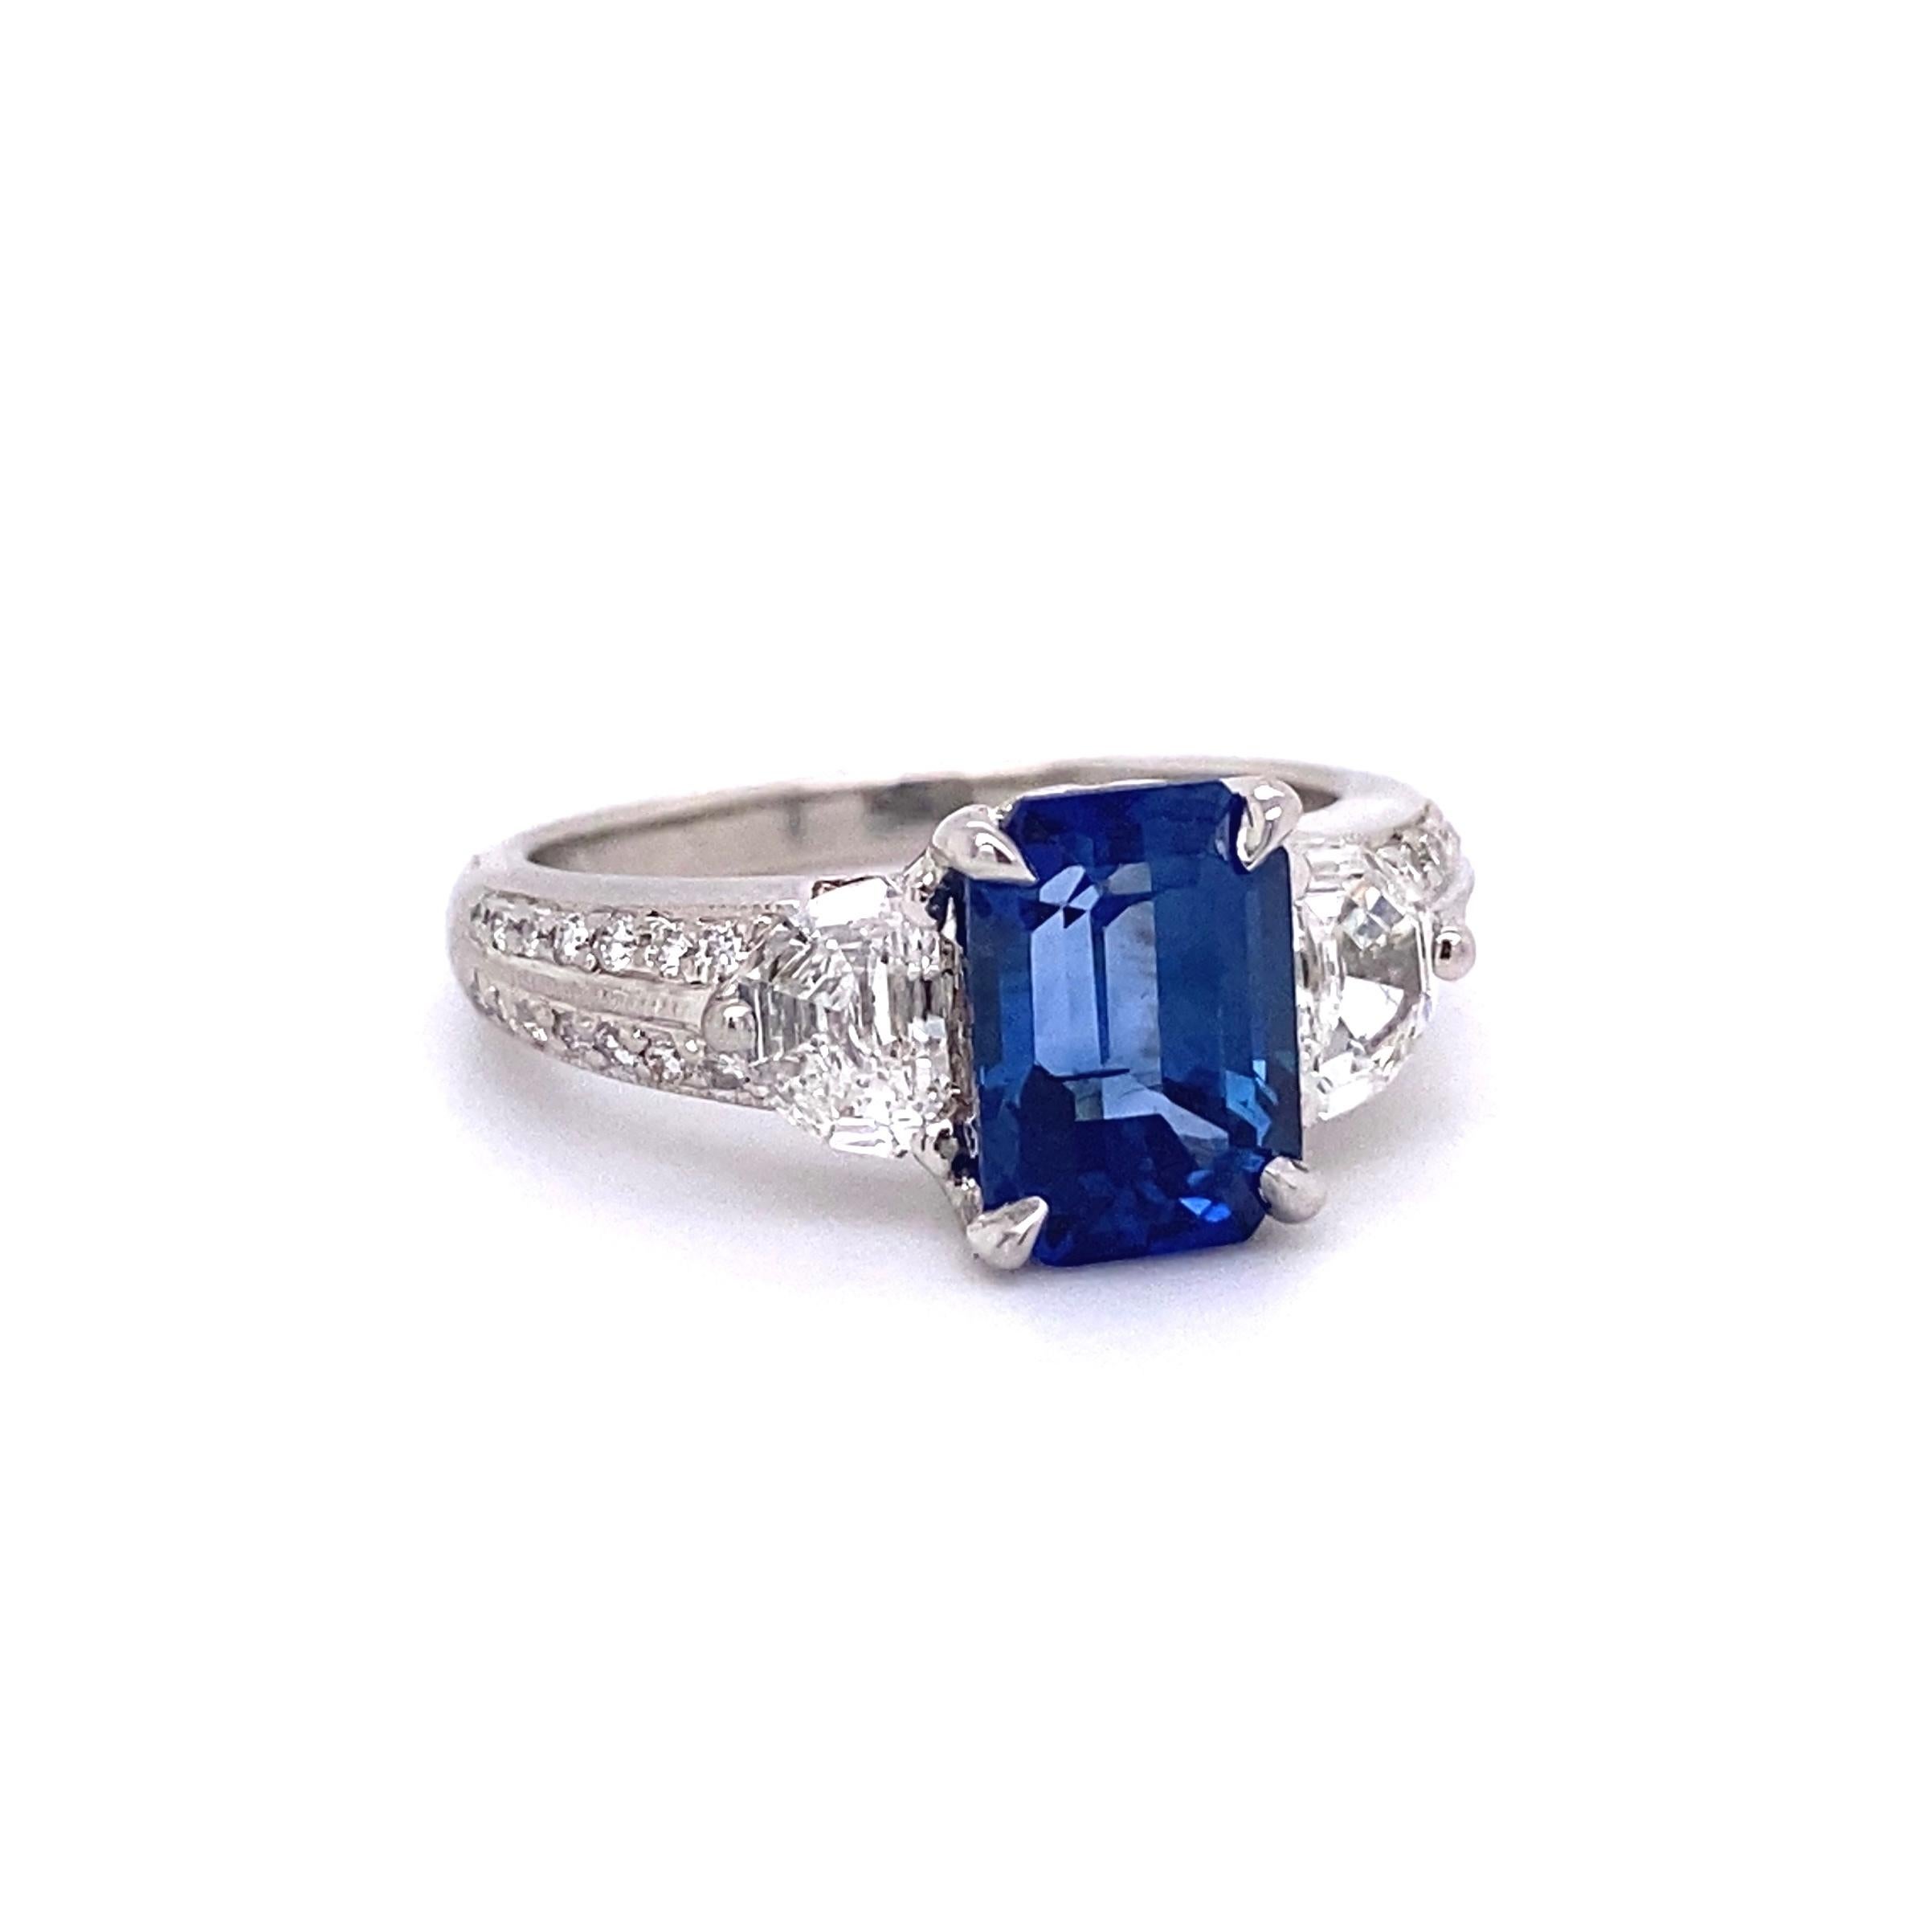 Simply Beautiful! Sapphire and Diamond Solitaire Platinum Ring. Centering an Emerald-cut Sapphire, weighing approx. 3.00 Carat accented either side by Diamonds approx. 0.94tcw.  Hand crafted Platinum mounting. Dimensions: 1.01” l x 0.84” w x 0.35”